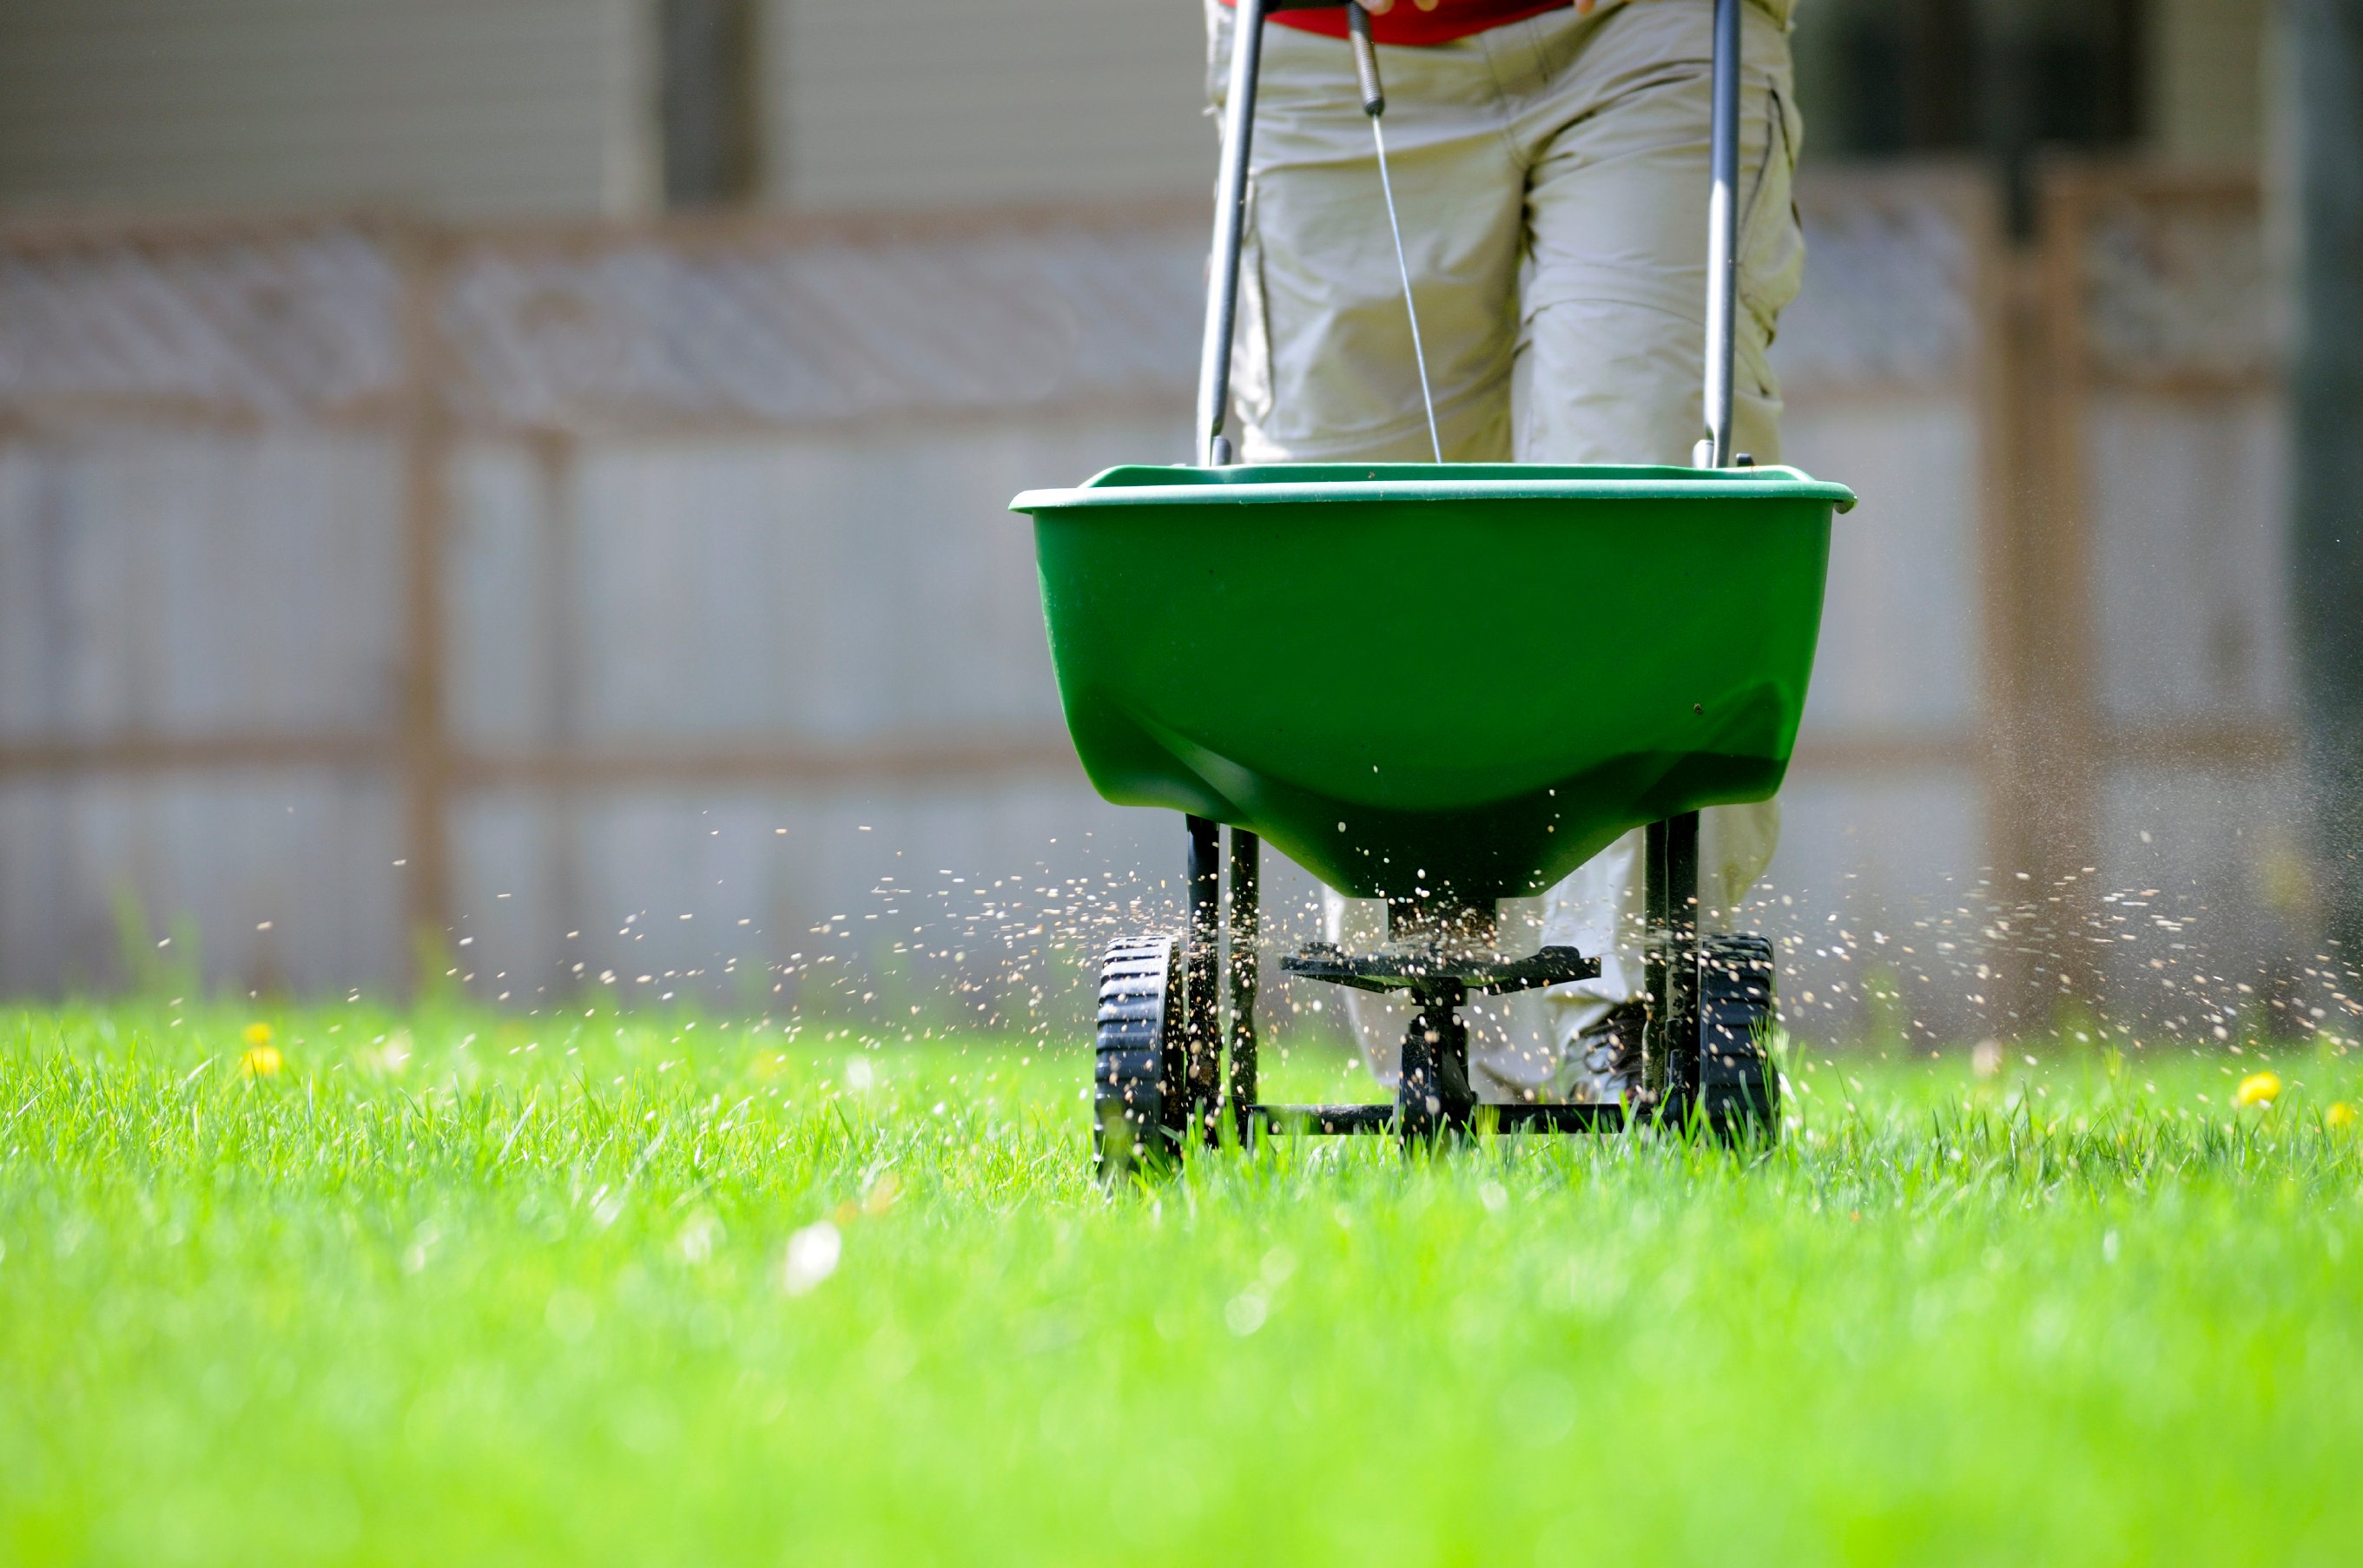 spring lawn care tips for portland, me